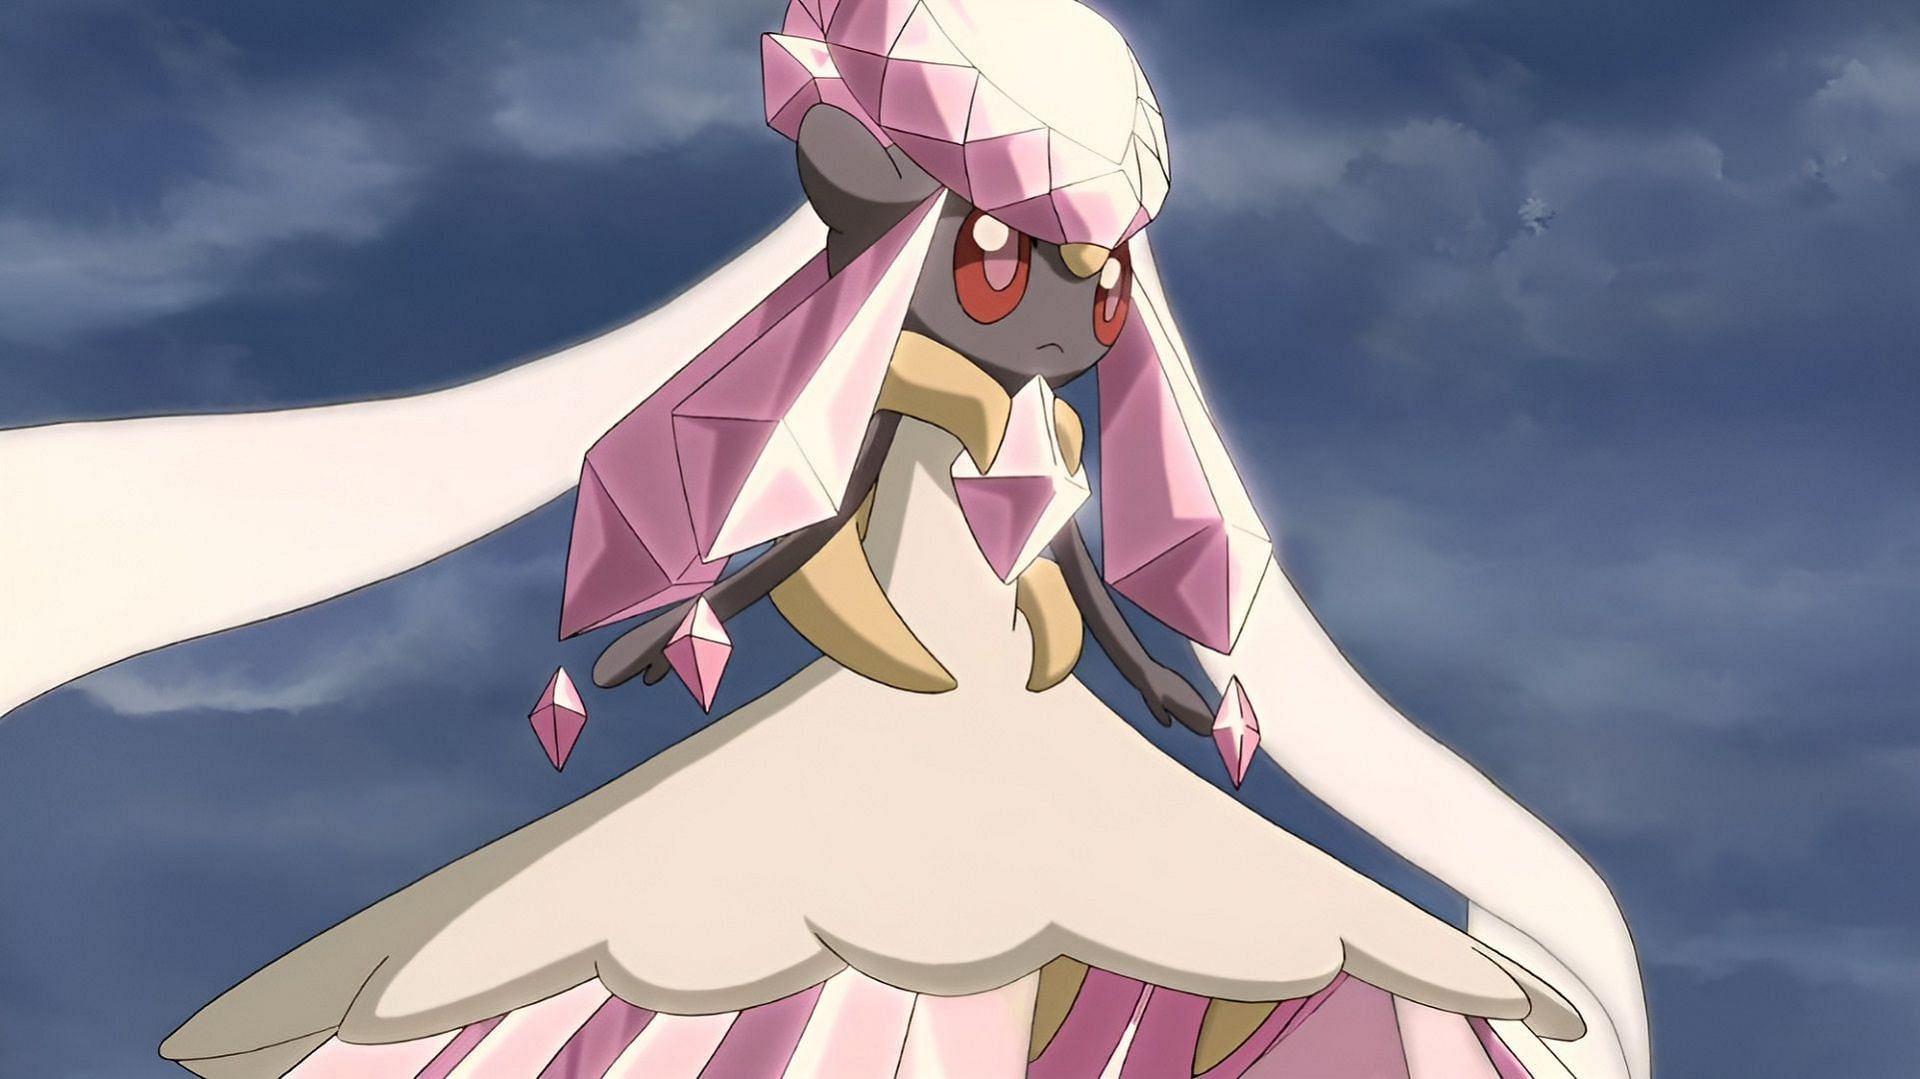 Mega Diancie in the movie Diancie and the Cocoon of Destruction (Image via The Pokemon Company)